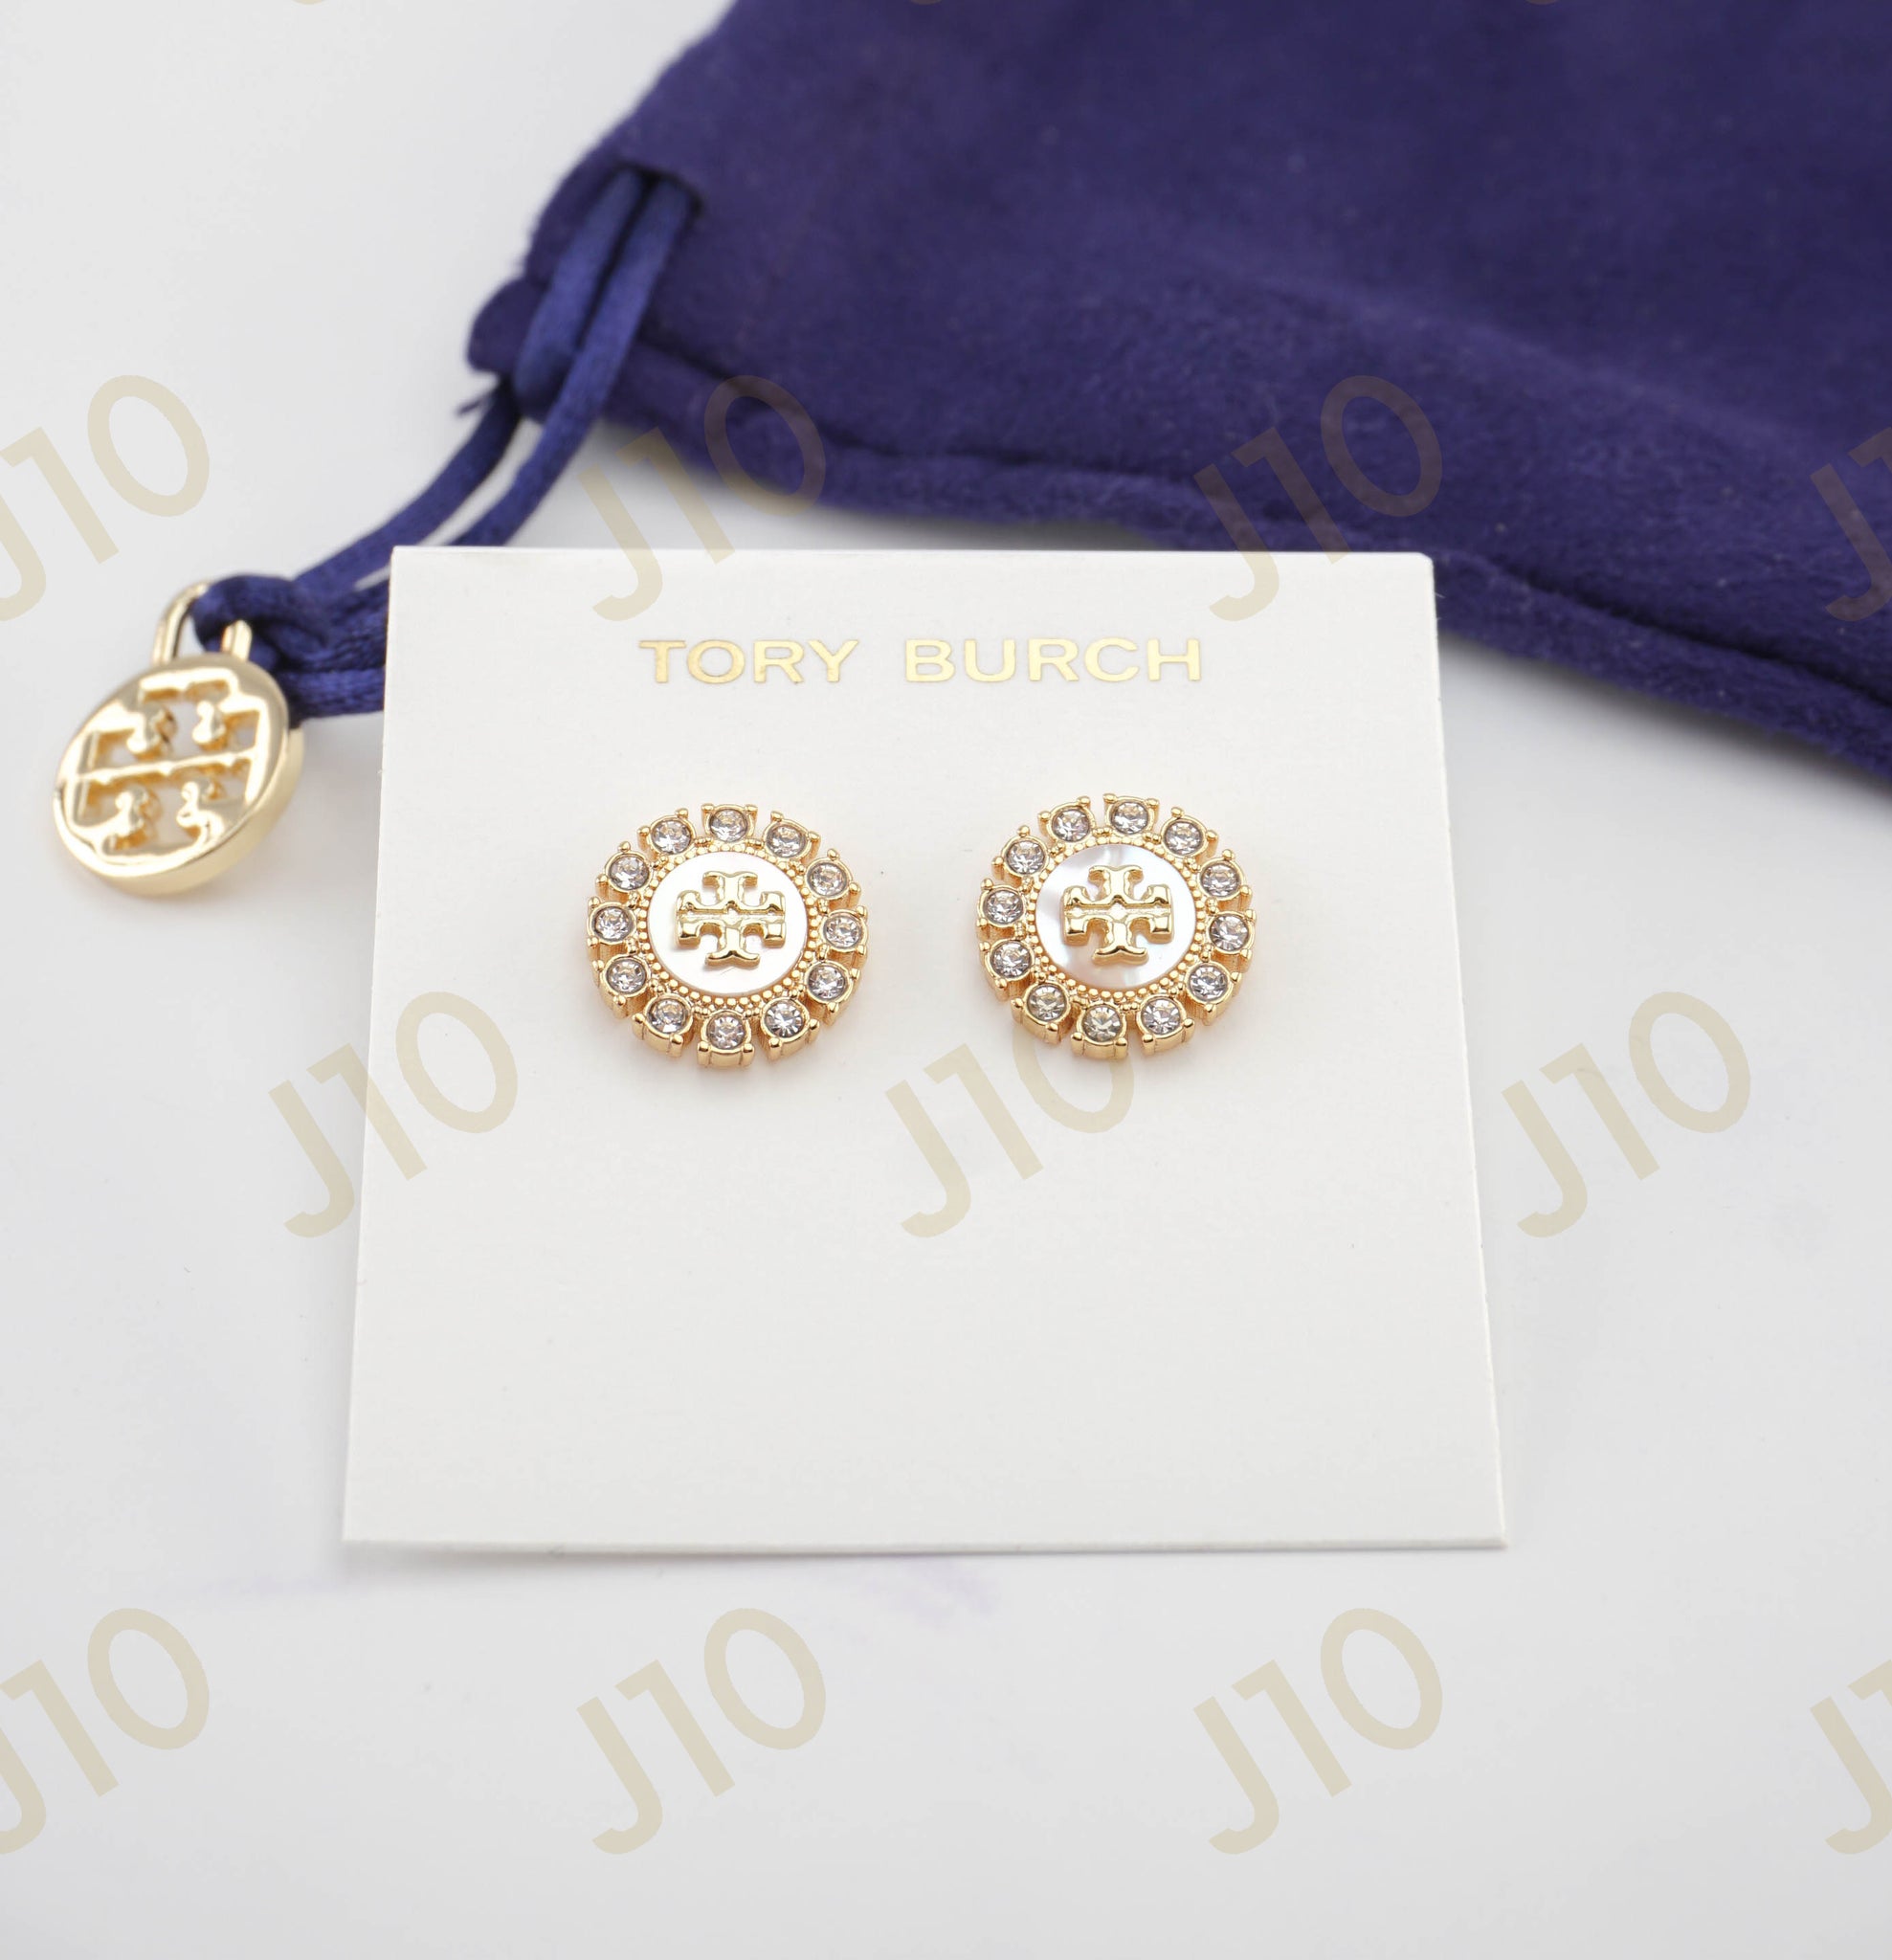 Tory Burch Kira Crystal Stud Earrings in Tory Gold/Mother of Pearl/Cry